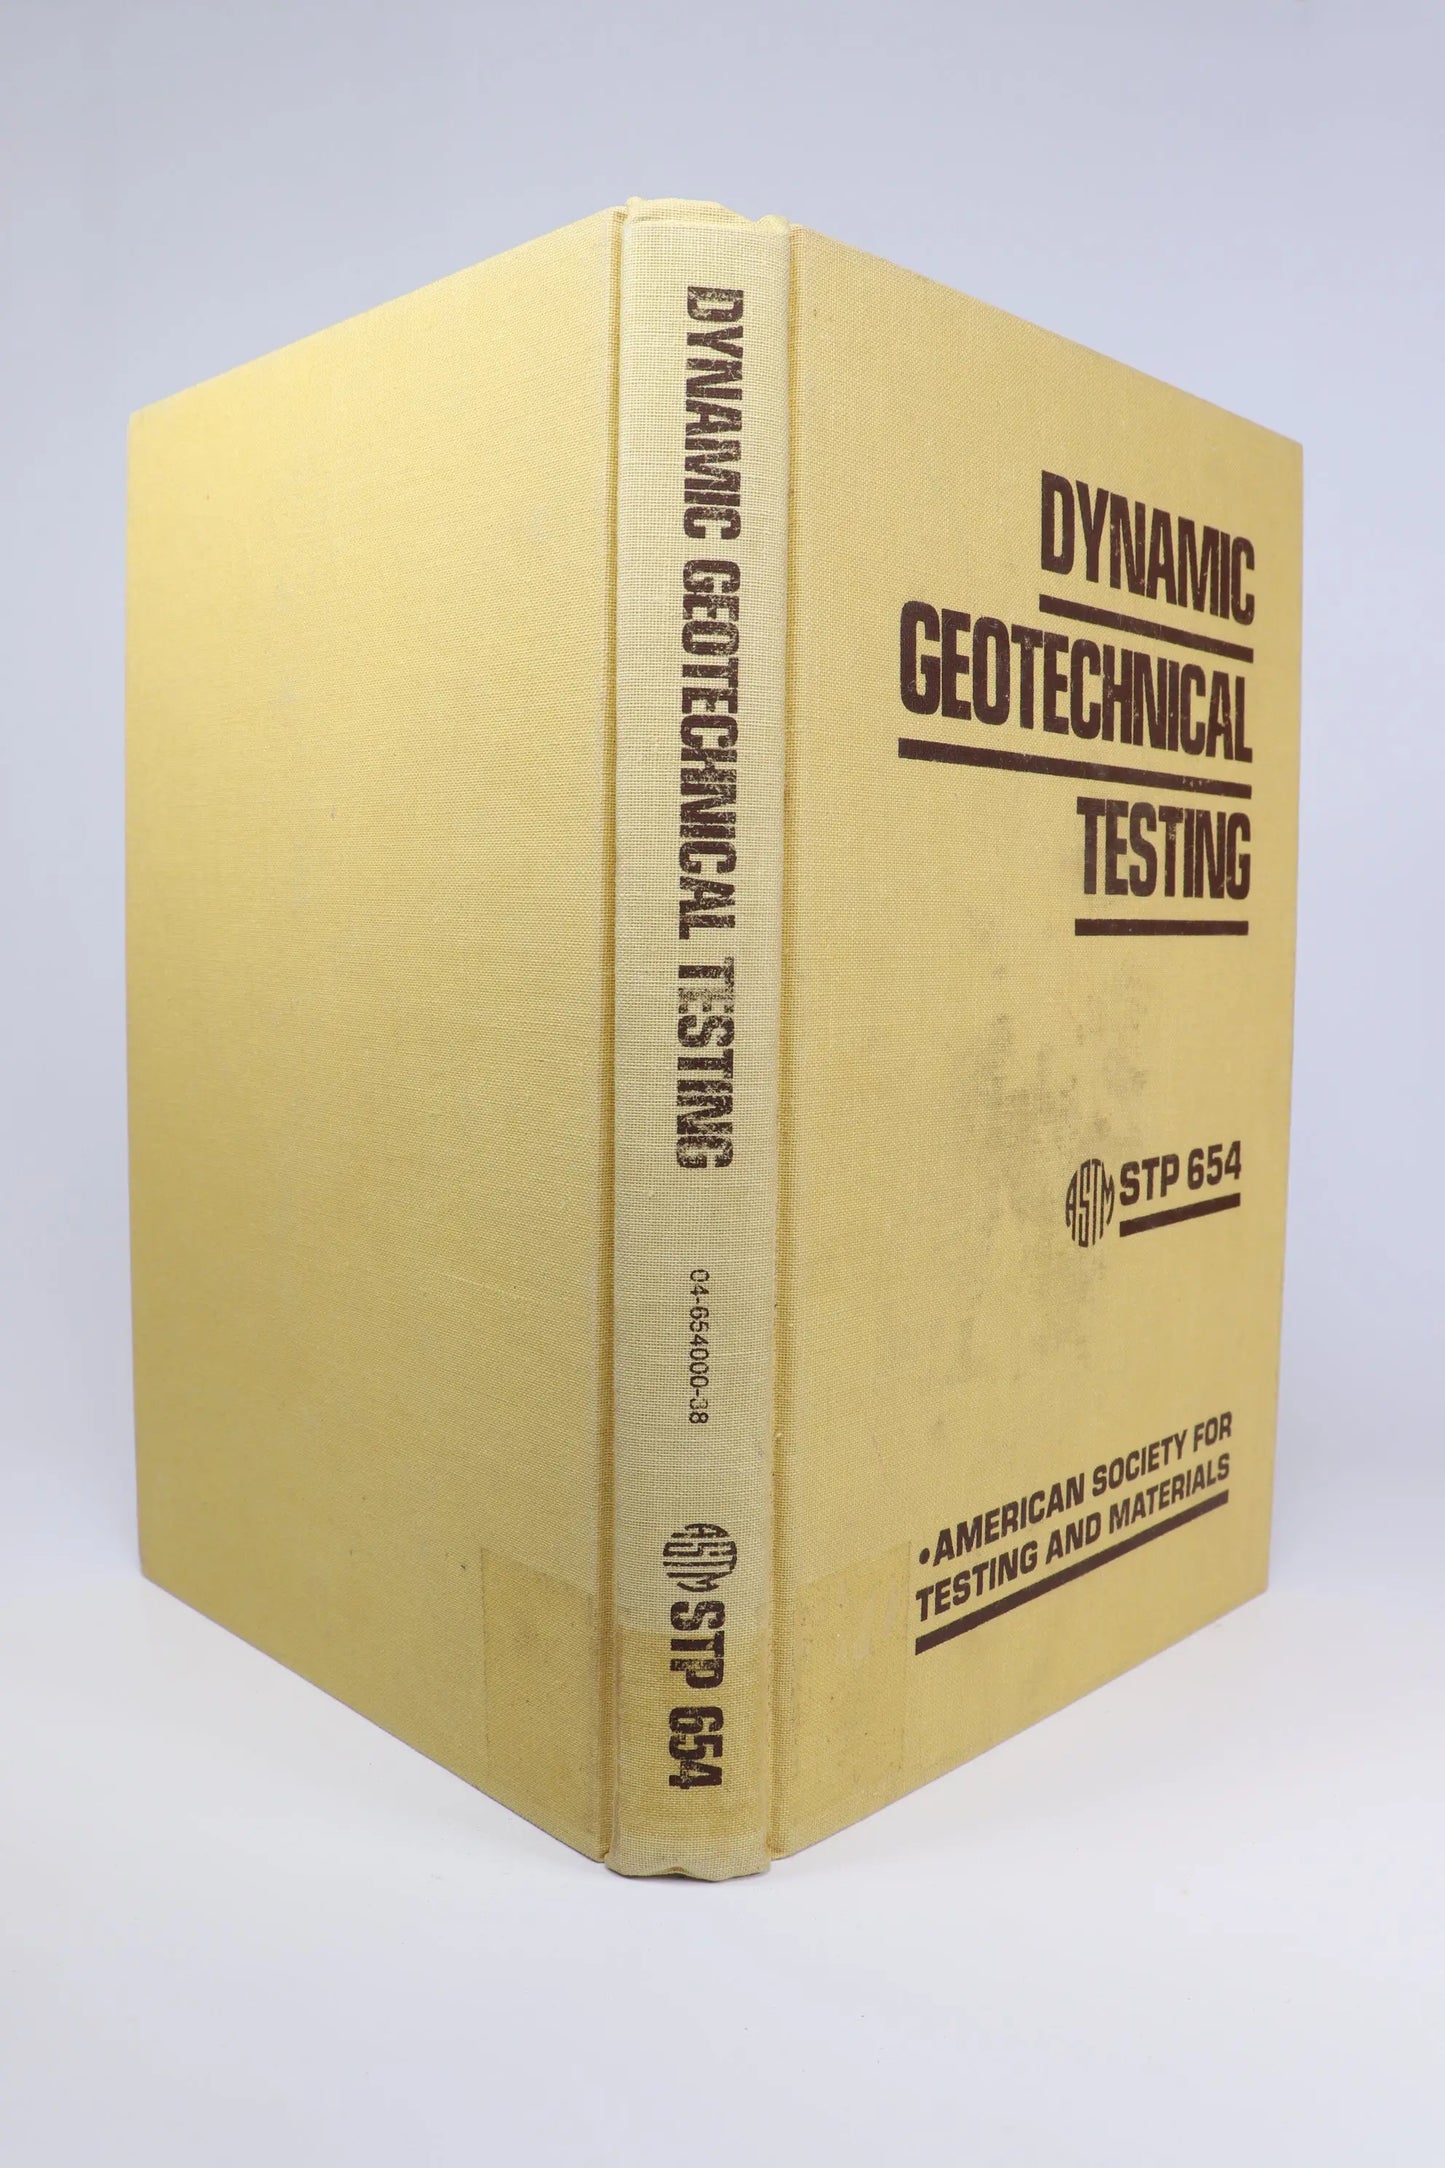 Dynamic Geotechnical Testing - THE STEMCELL SCIENCE SHOP